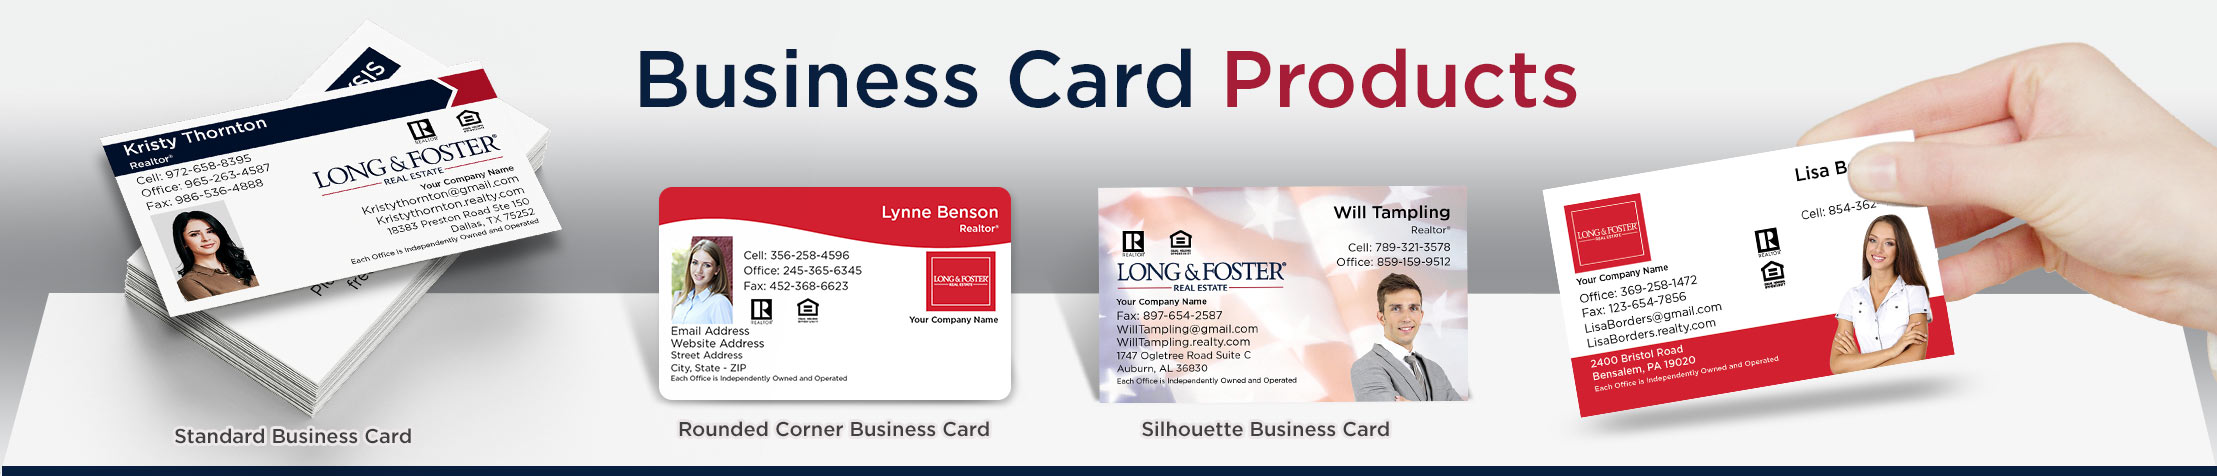 Long and Foster Real Estate Business Card Products - Long and Foster  - Unique, Custom Business Cards Printed on Quality Stock with Creative Designs for Realtors | BestPrintBuy.com